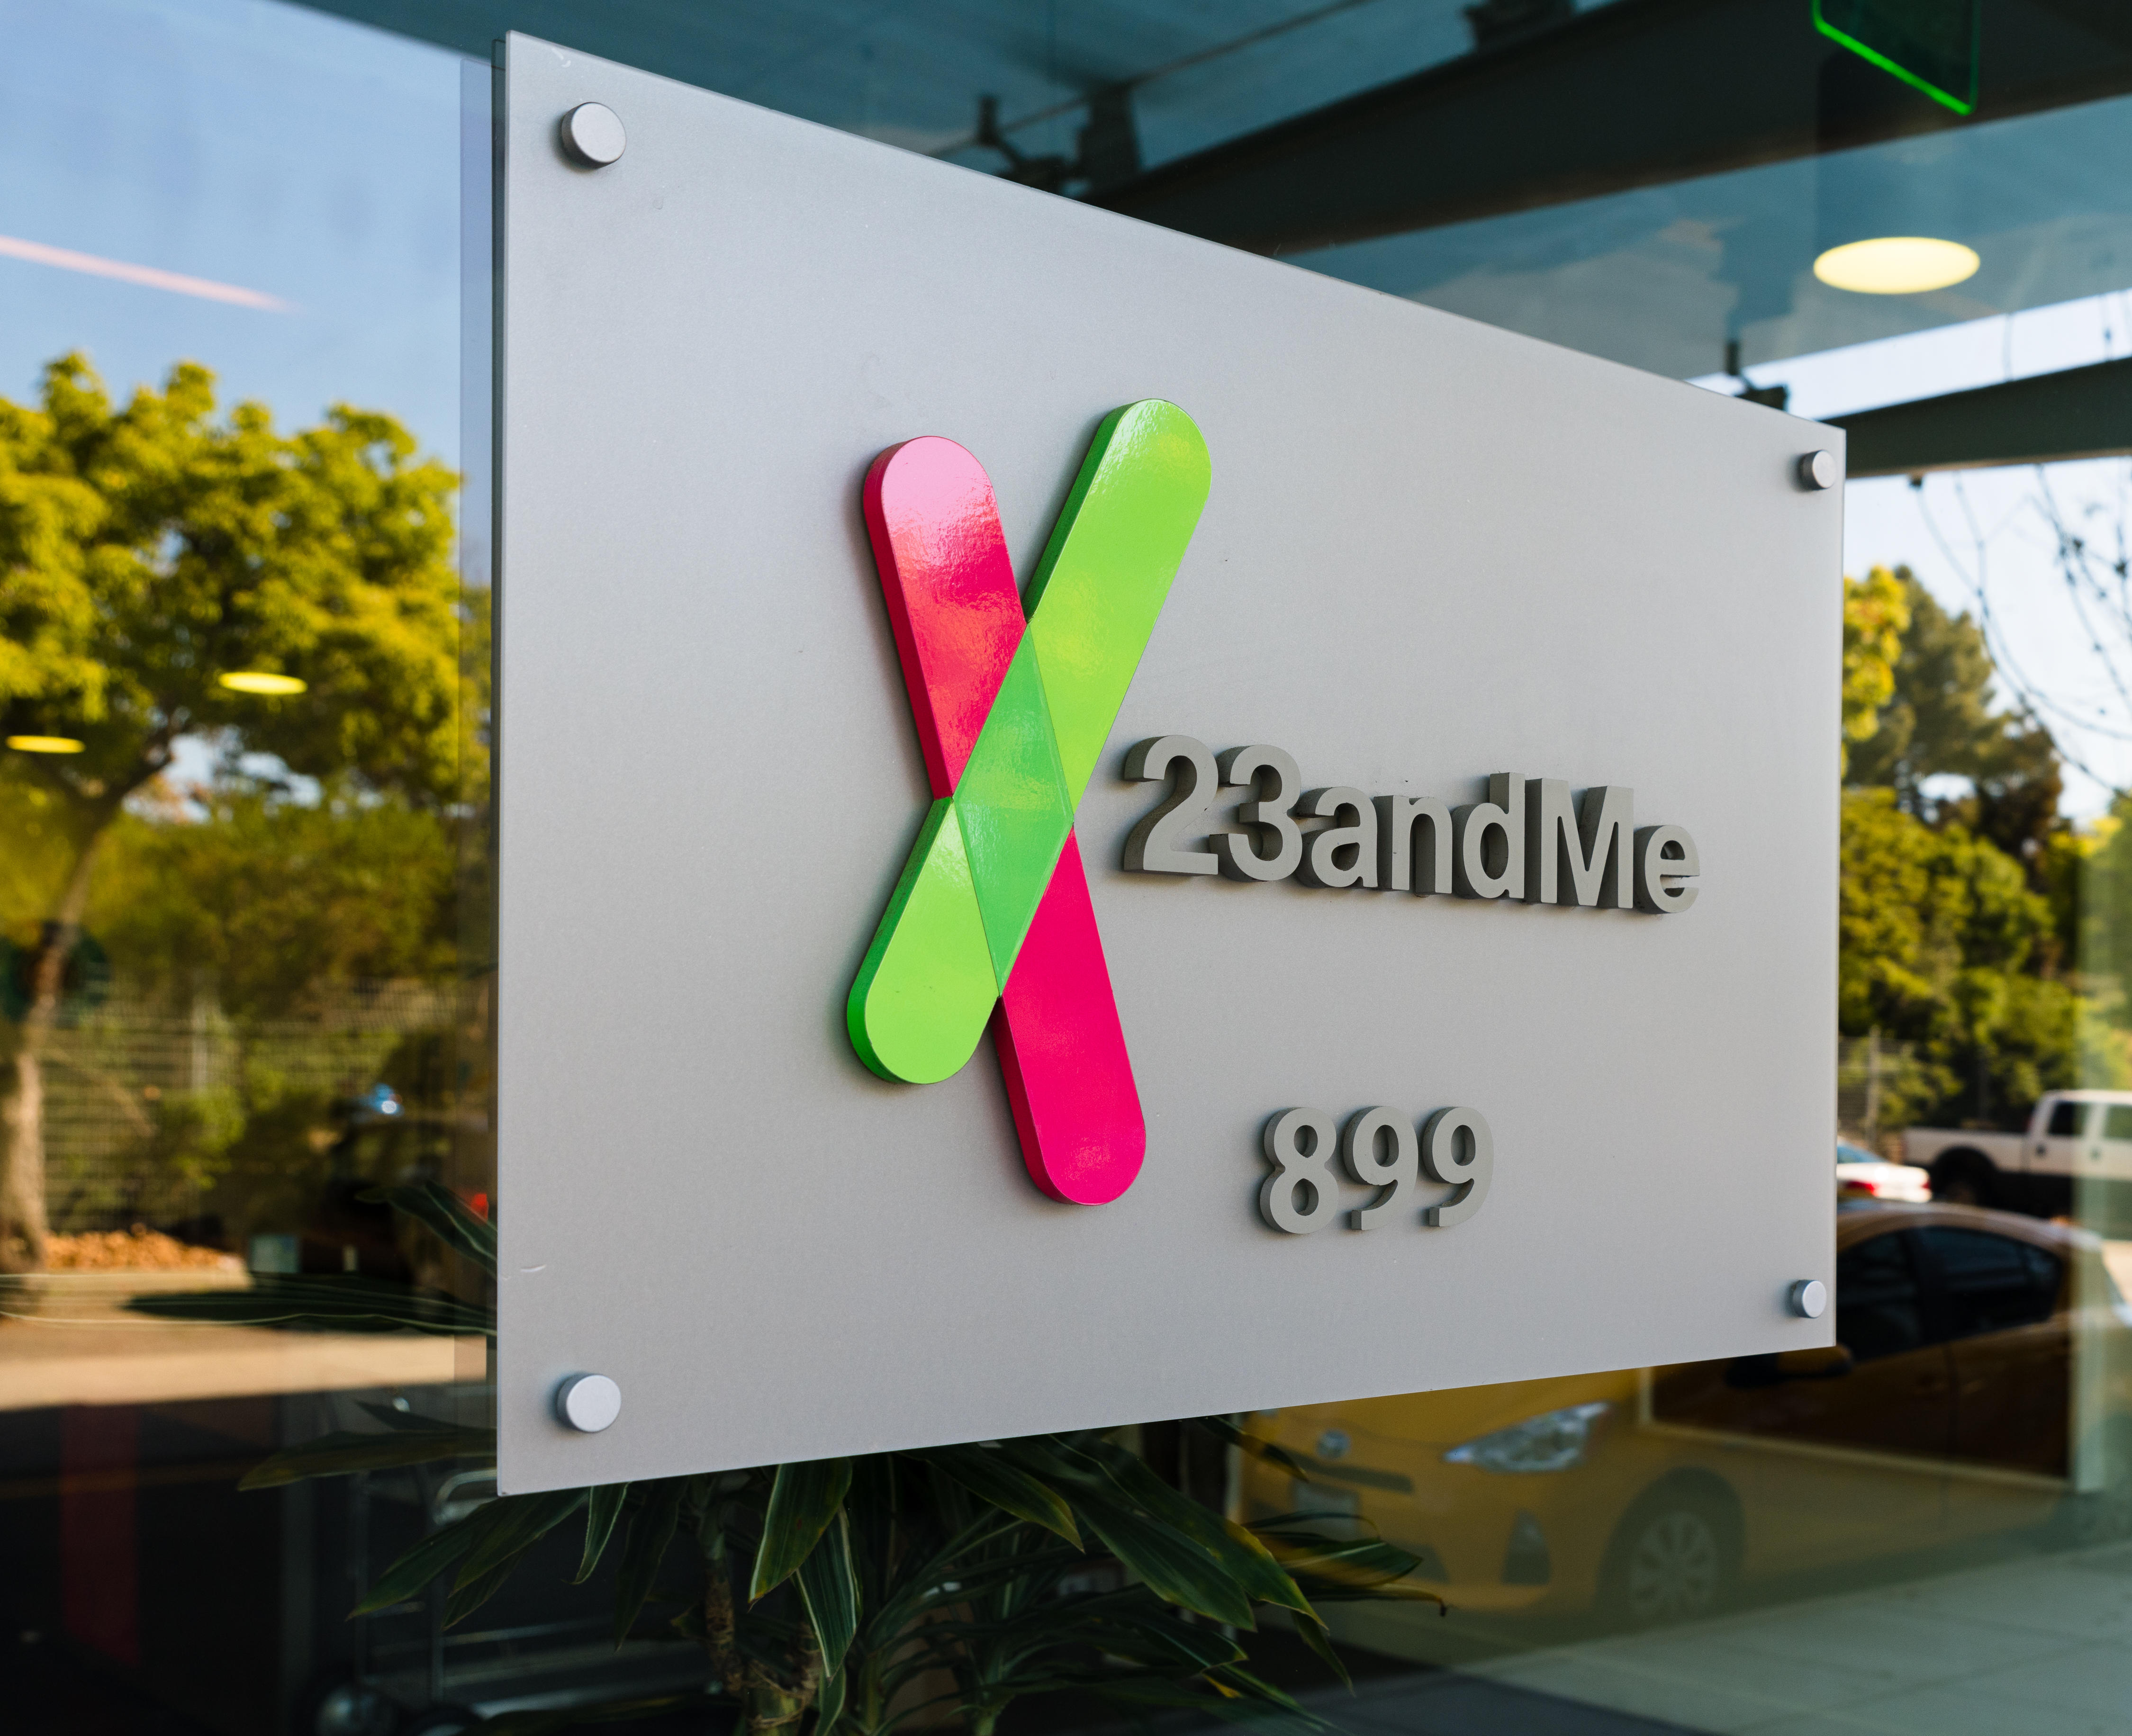 From Dark Reading – 23AndMe Hacker Leaks New Tranche of Stolen Data